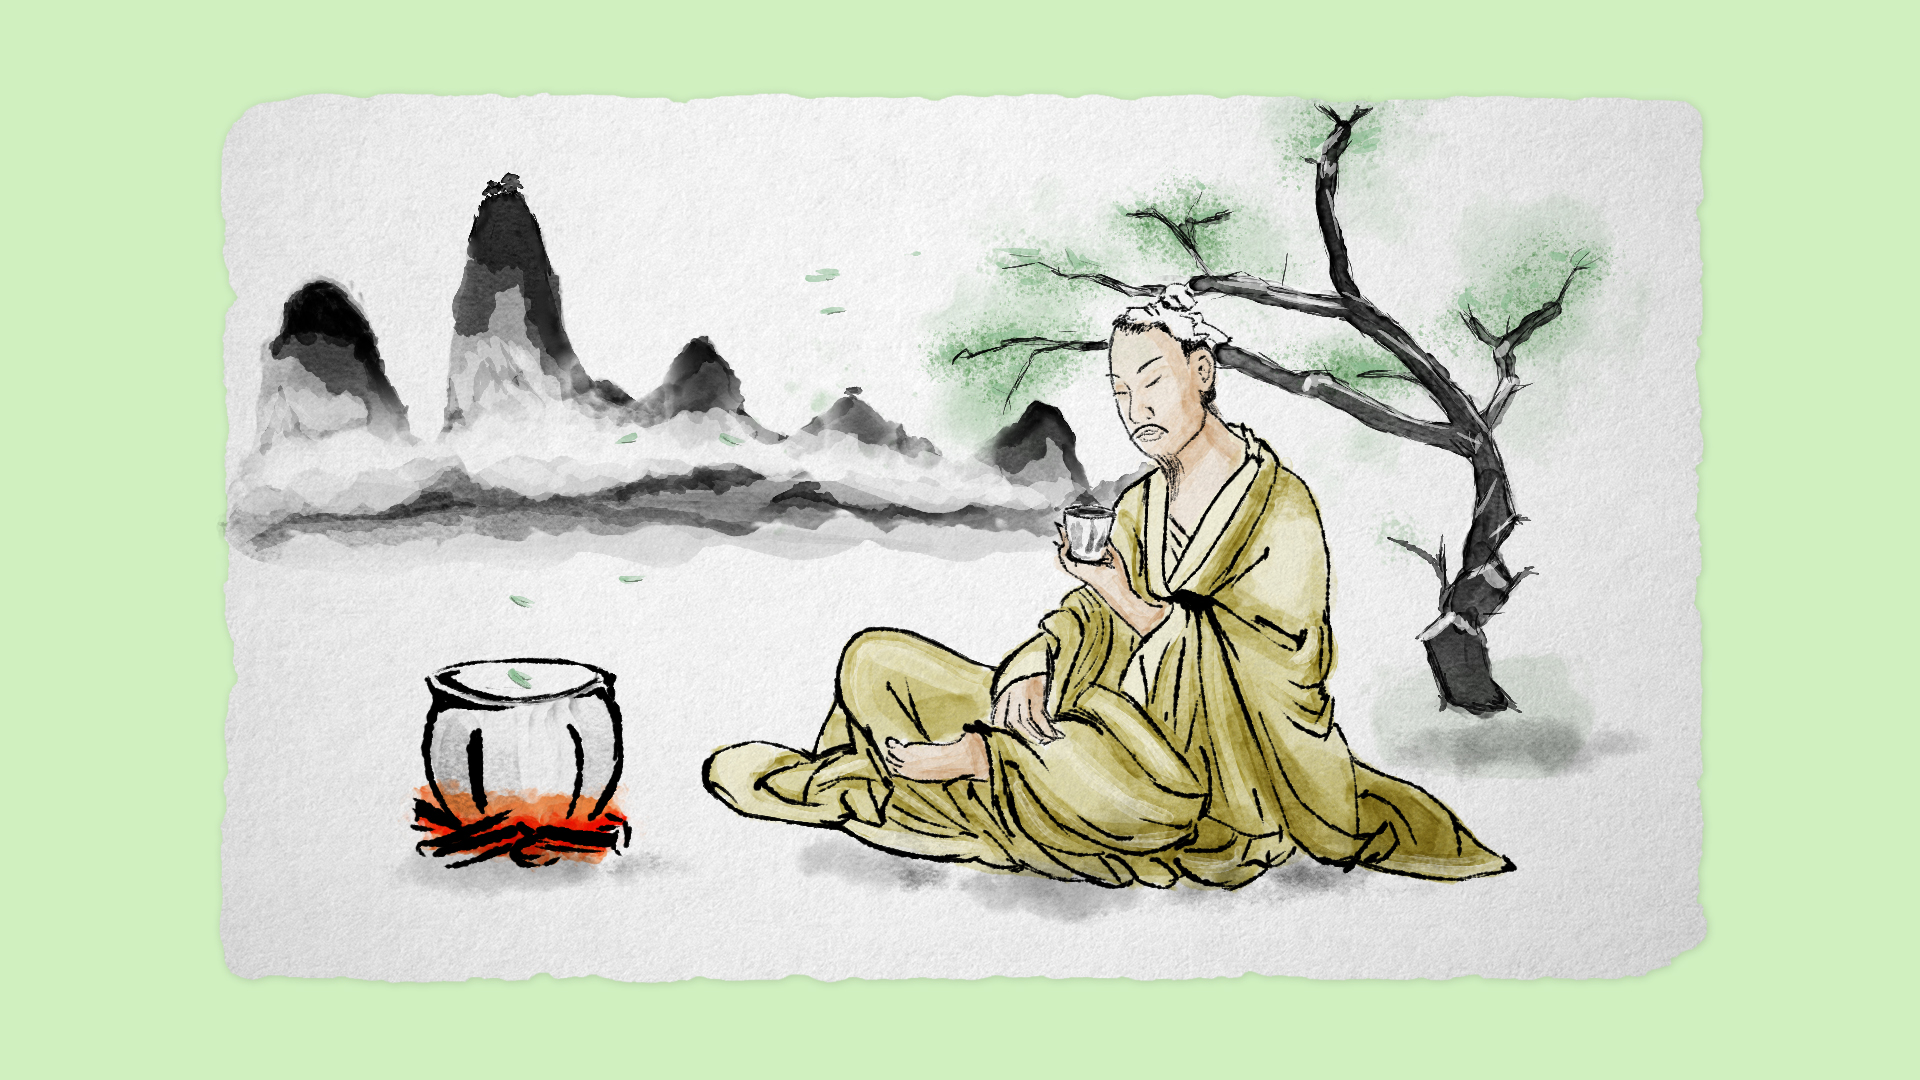 An illustration of a Chinese man drinking a cup of tea in ancient China.